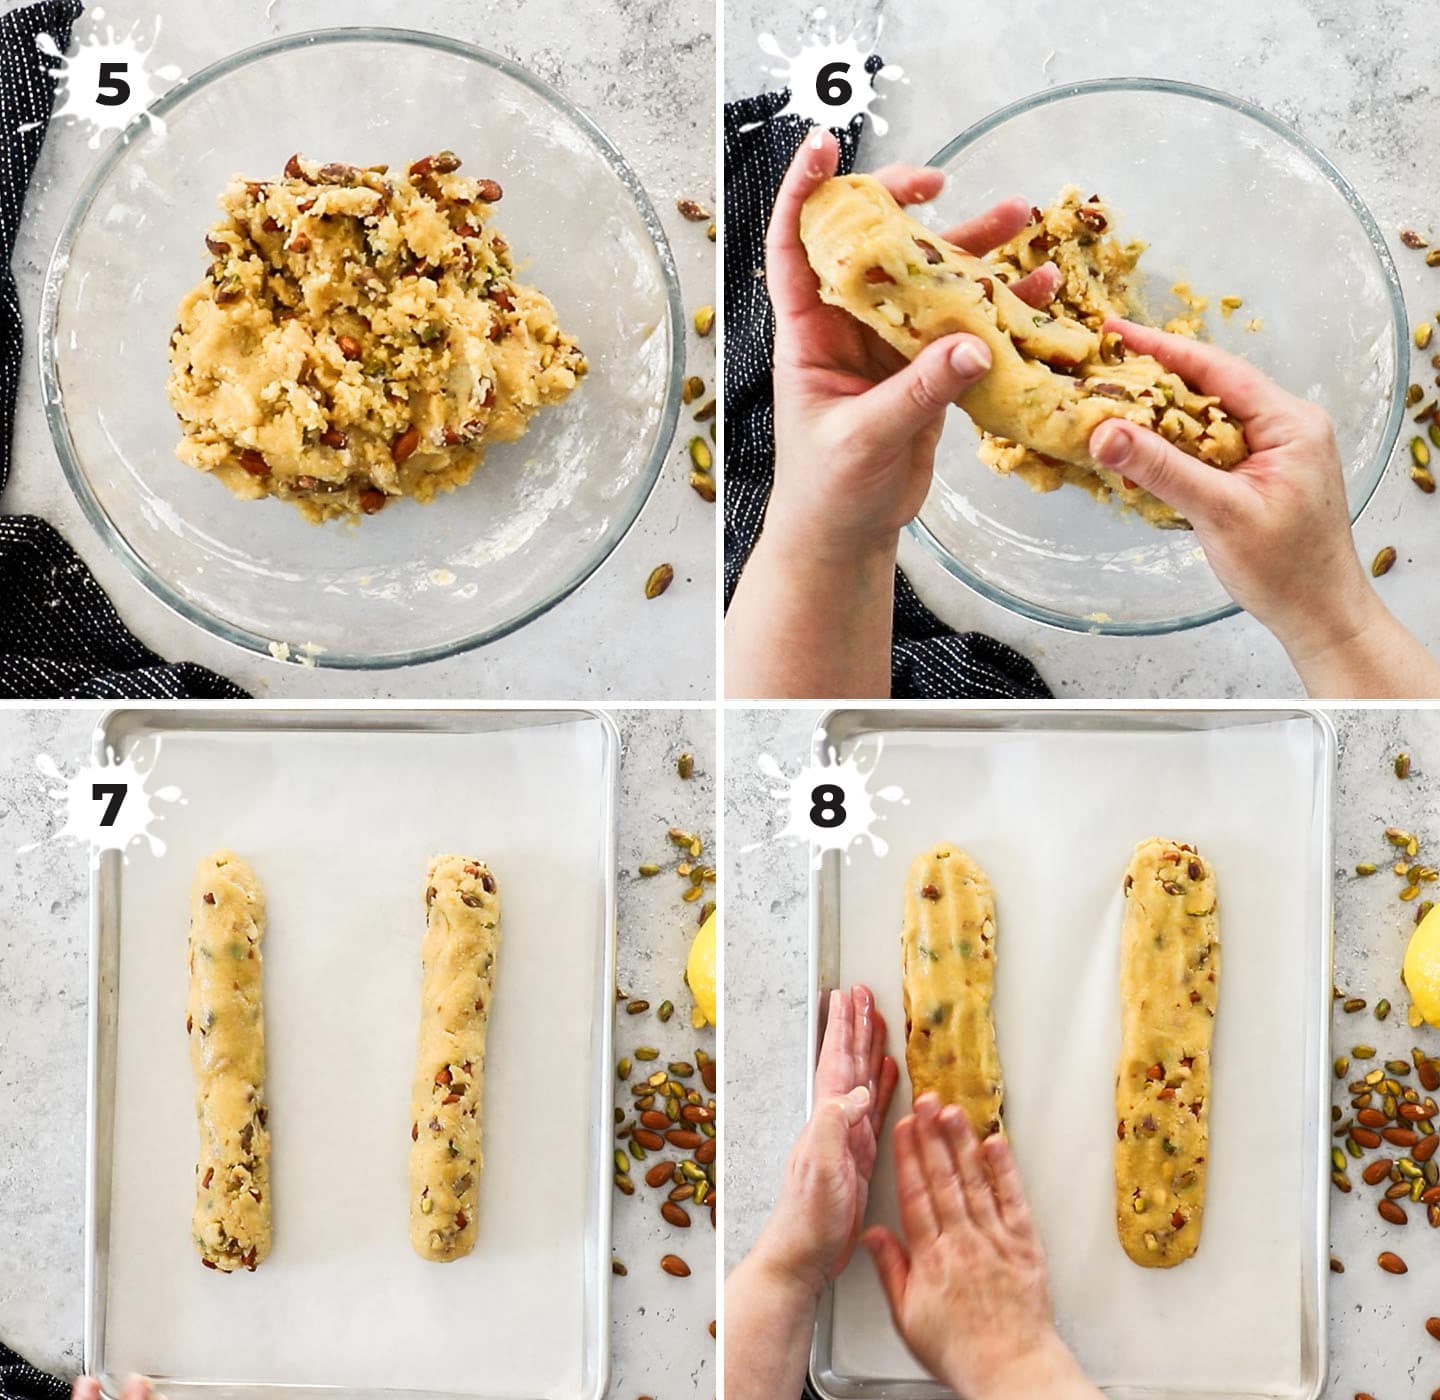 Showing how to shape the biscotti dough.